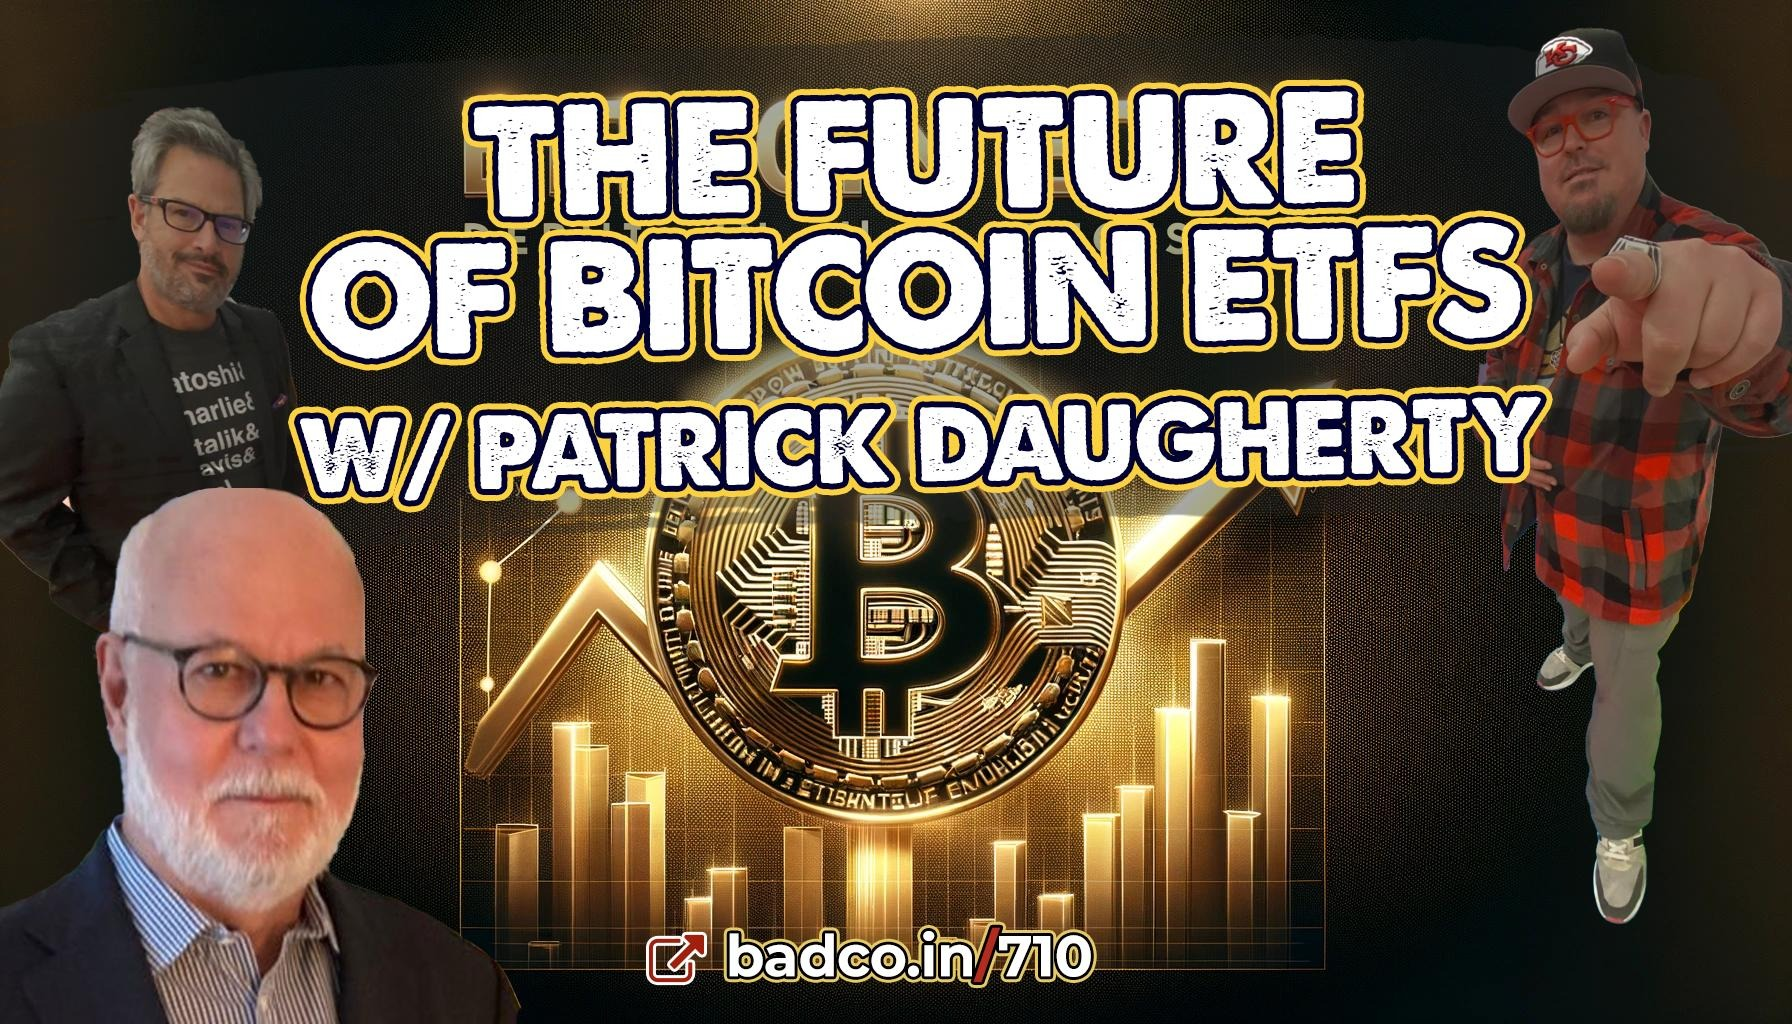 The Future of Bitcoin ETFs with Patrick Daugherty